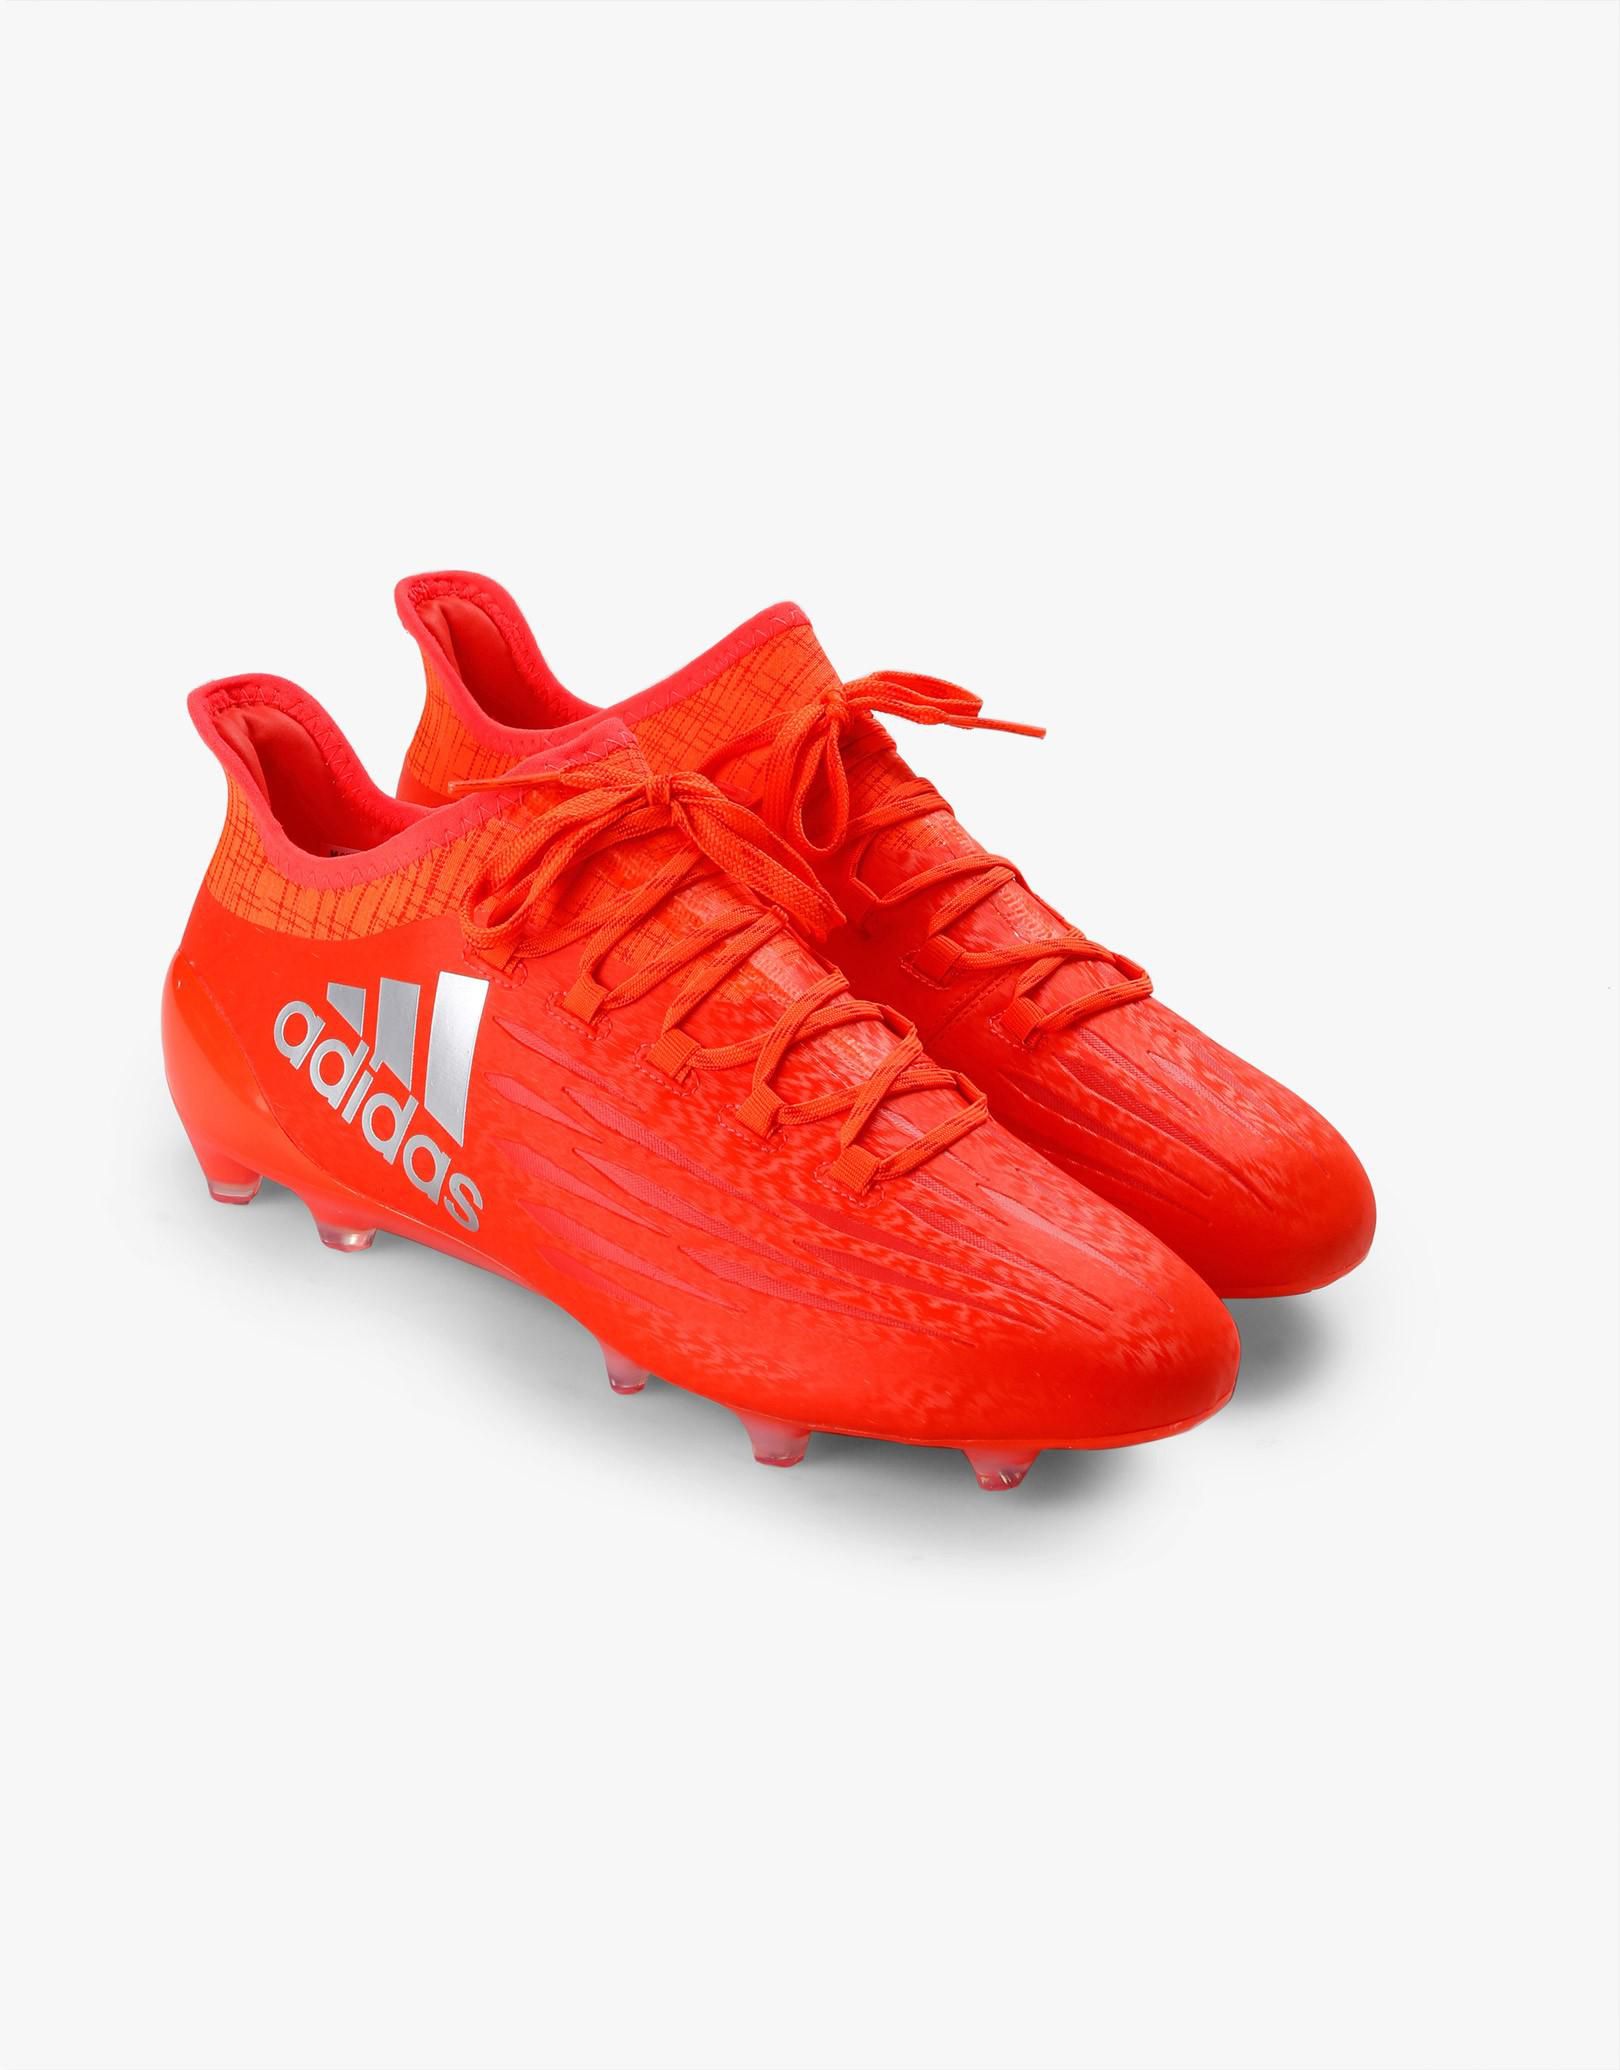 X 16.1 Firm Ground Cleats